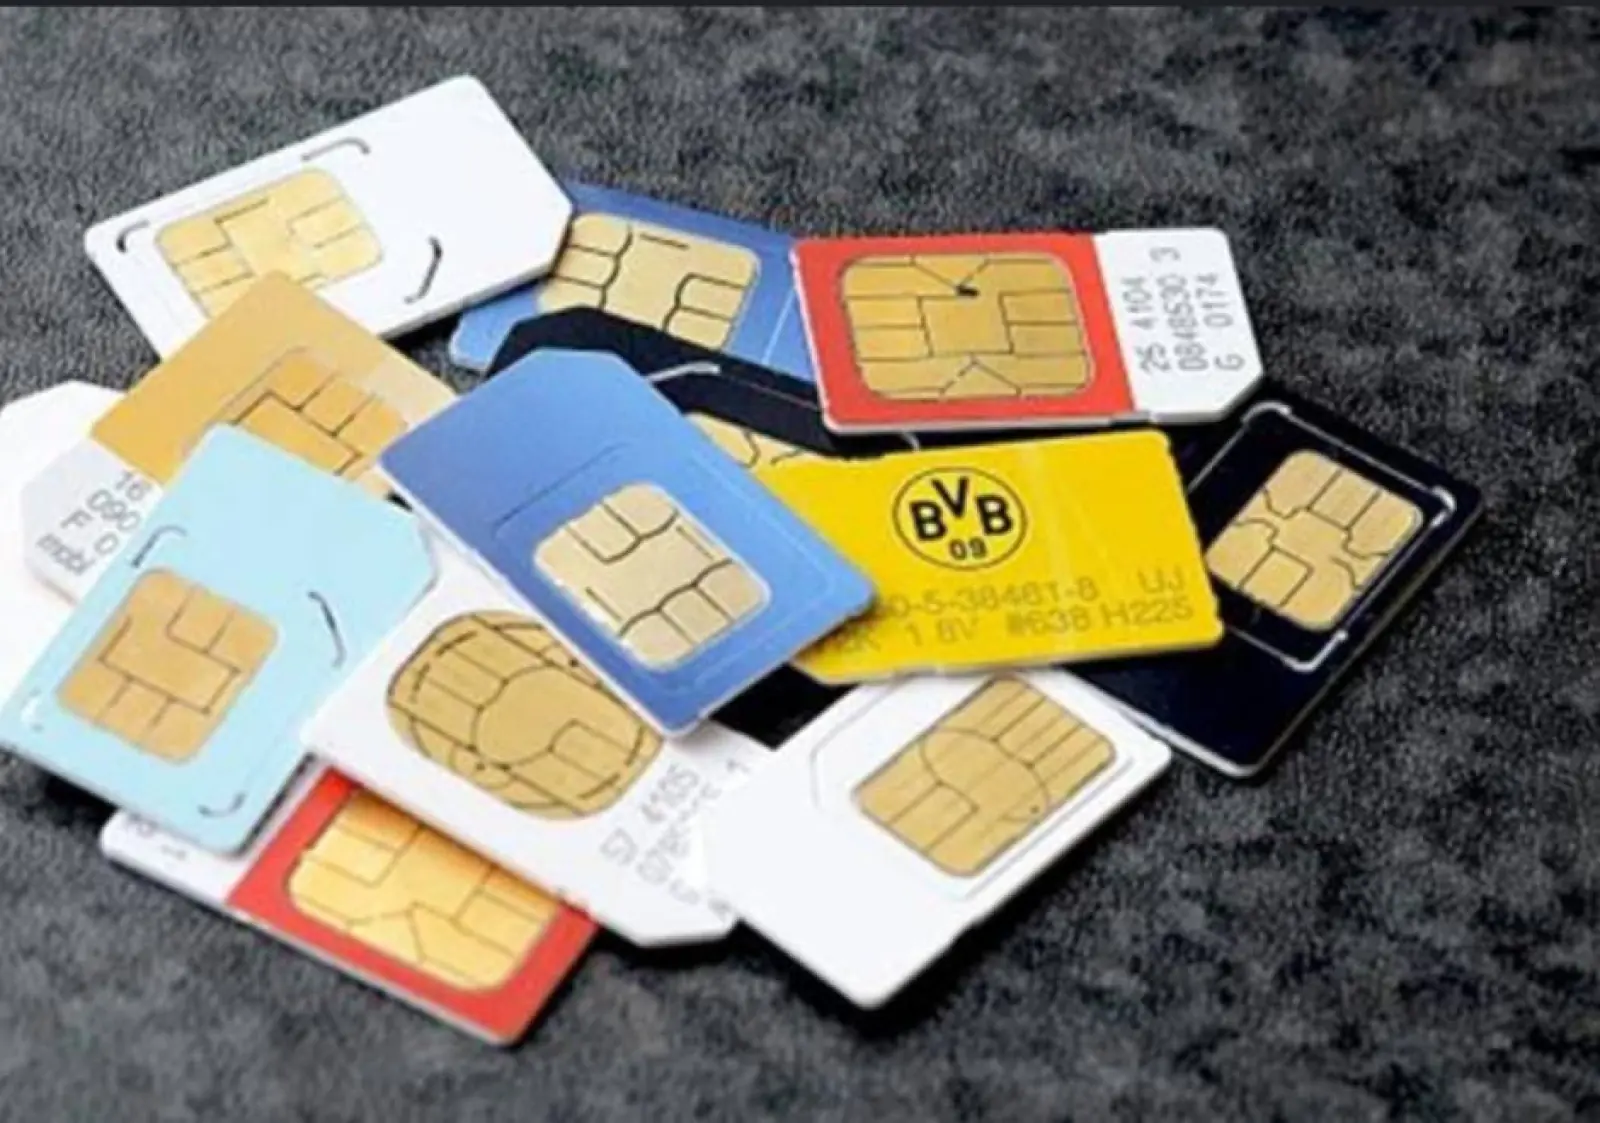 40000 SIM cards, more than 180 mobiles; This is how he used to commit fraud in online trading